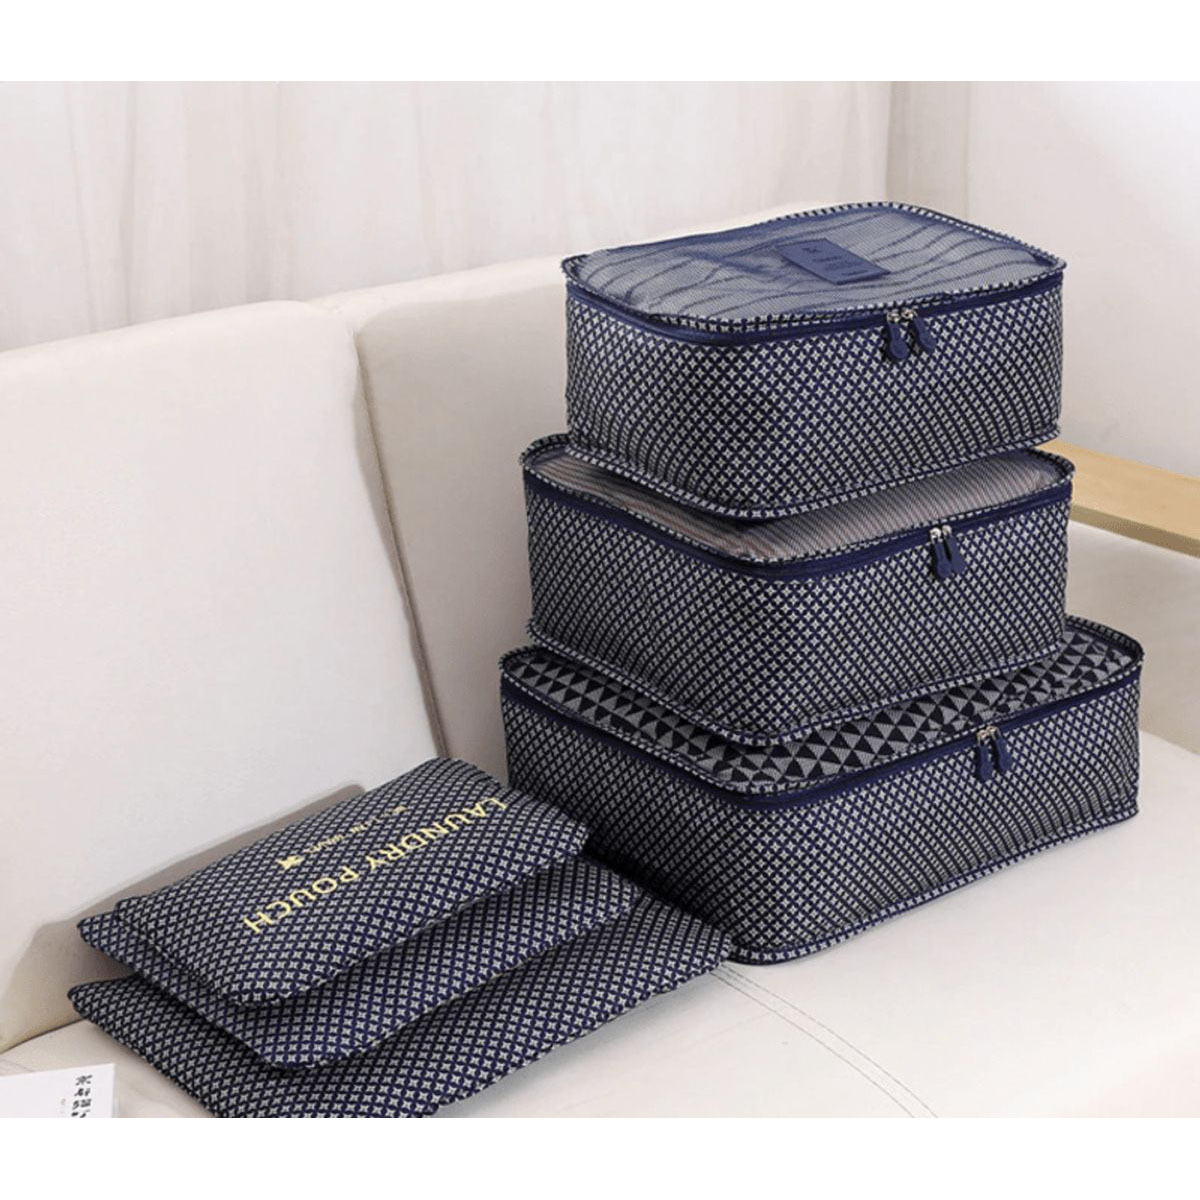 Photos - Travel Bags Threaded Pear Travel Organizer Pouch Set  - Navy Pattern TRAVEL6(6-Piece)